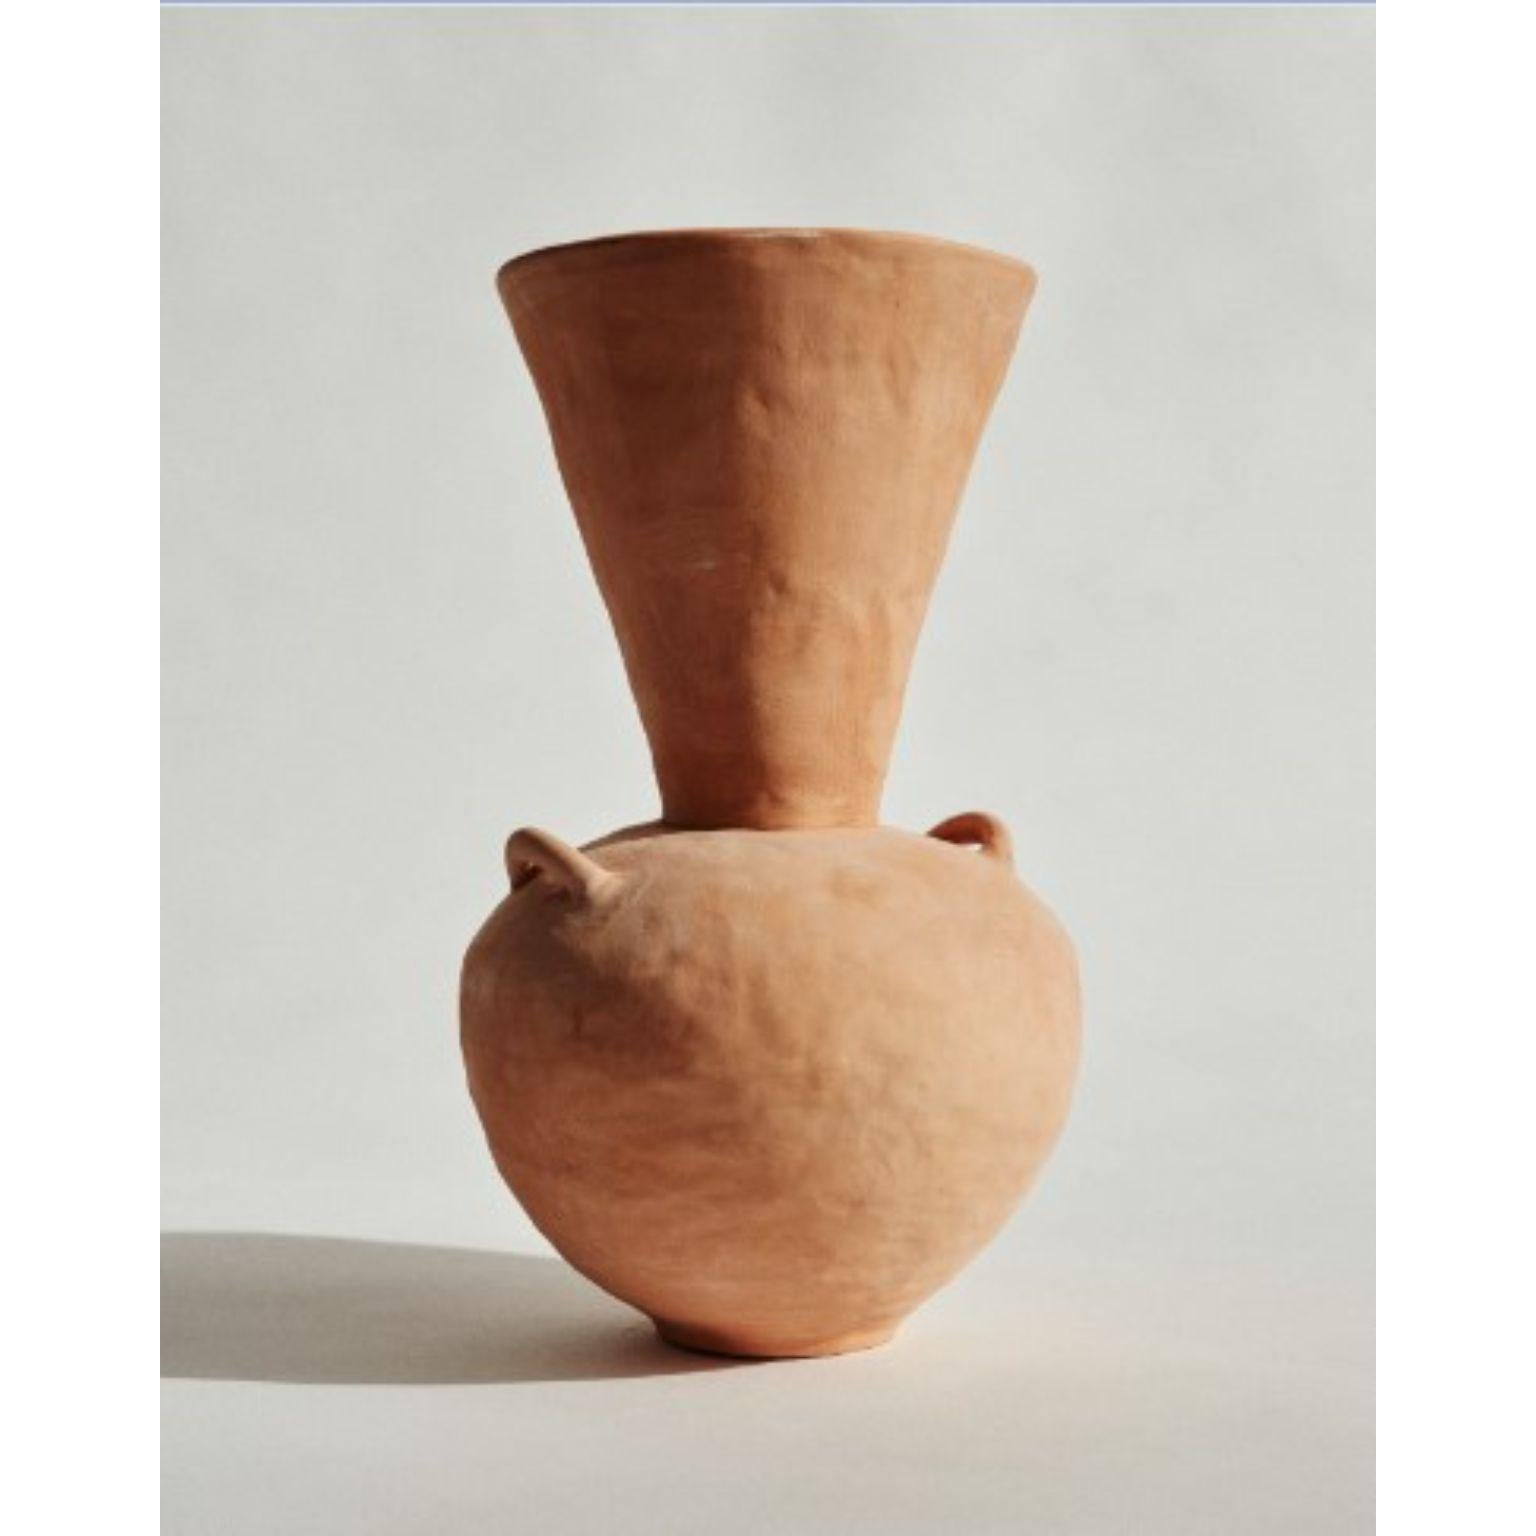 Terracota vase by Marta Bonilla
Dimensions: D20 x H33
Materials: Terracotta, clay.

Terracota vase: Low temperature hand modeled piece. Enameled inside. Outside it keeps the natural color of the clay, straw color.

Marta Bonilla designs and